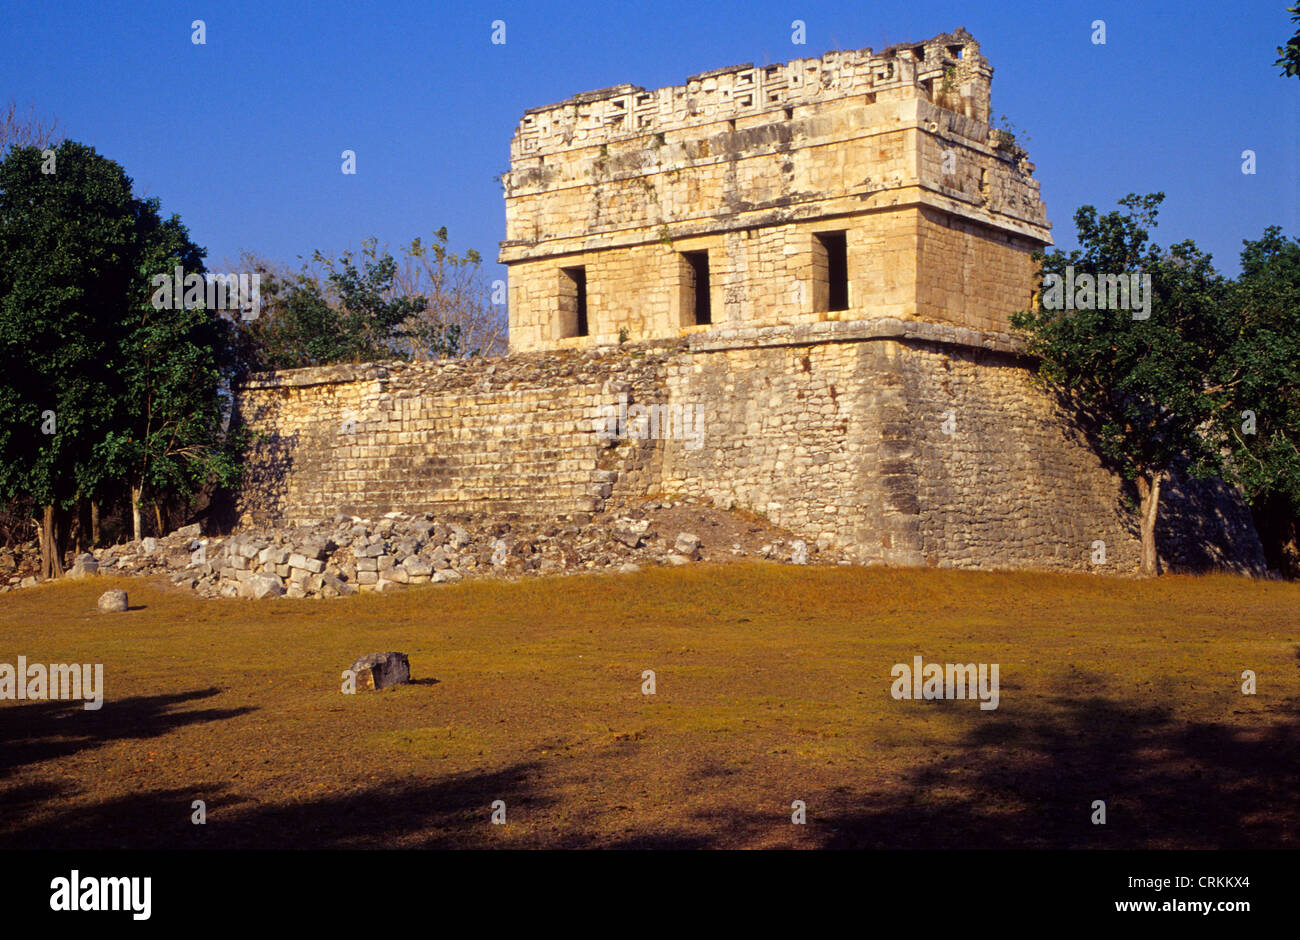 Casa Colorada, The Red House, Chichen Itza Archaeological Site . Mexico. Stock Photo